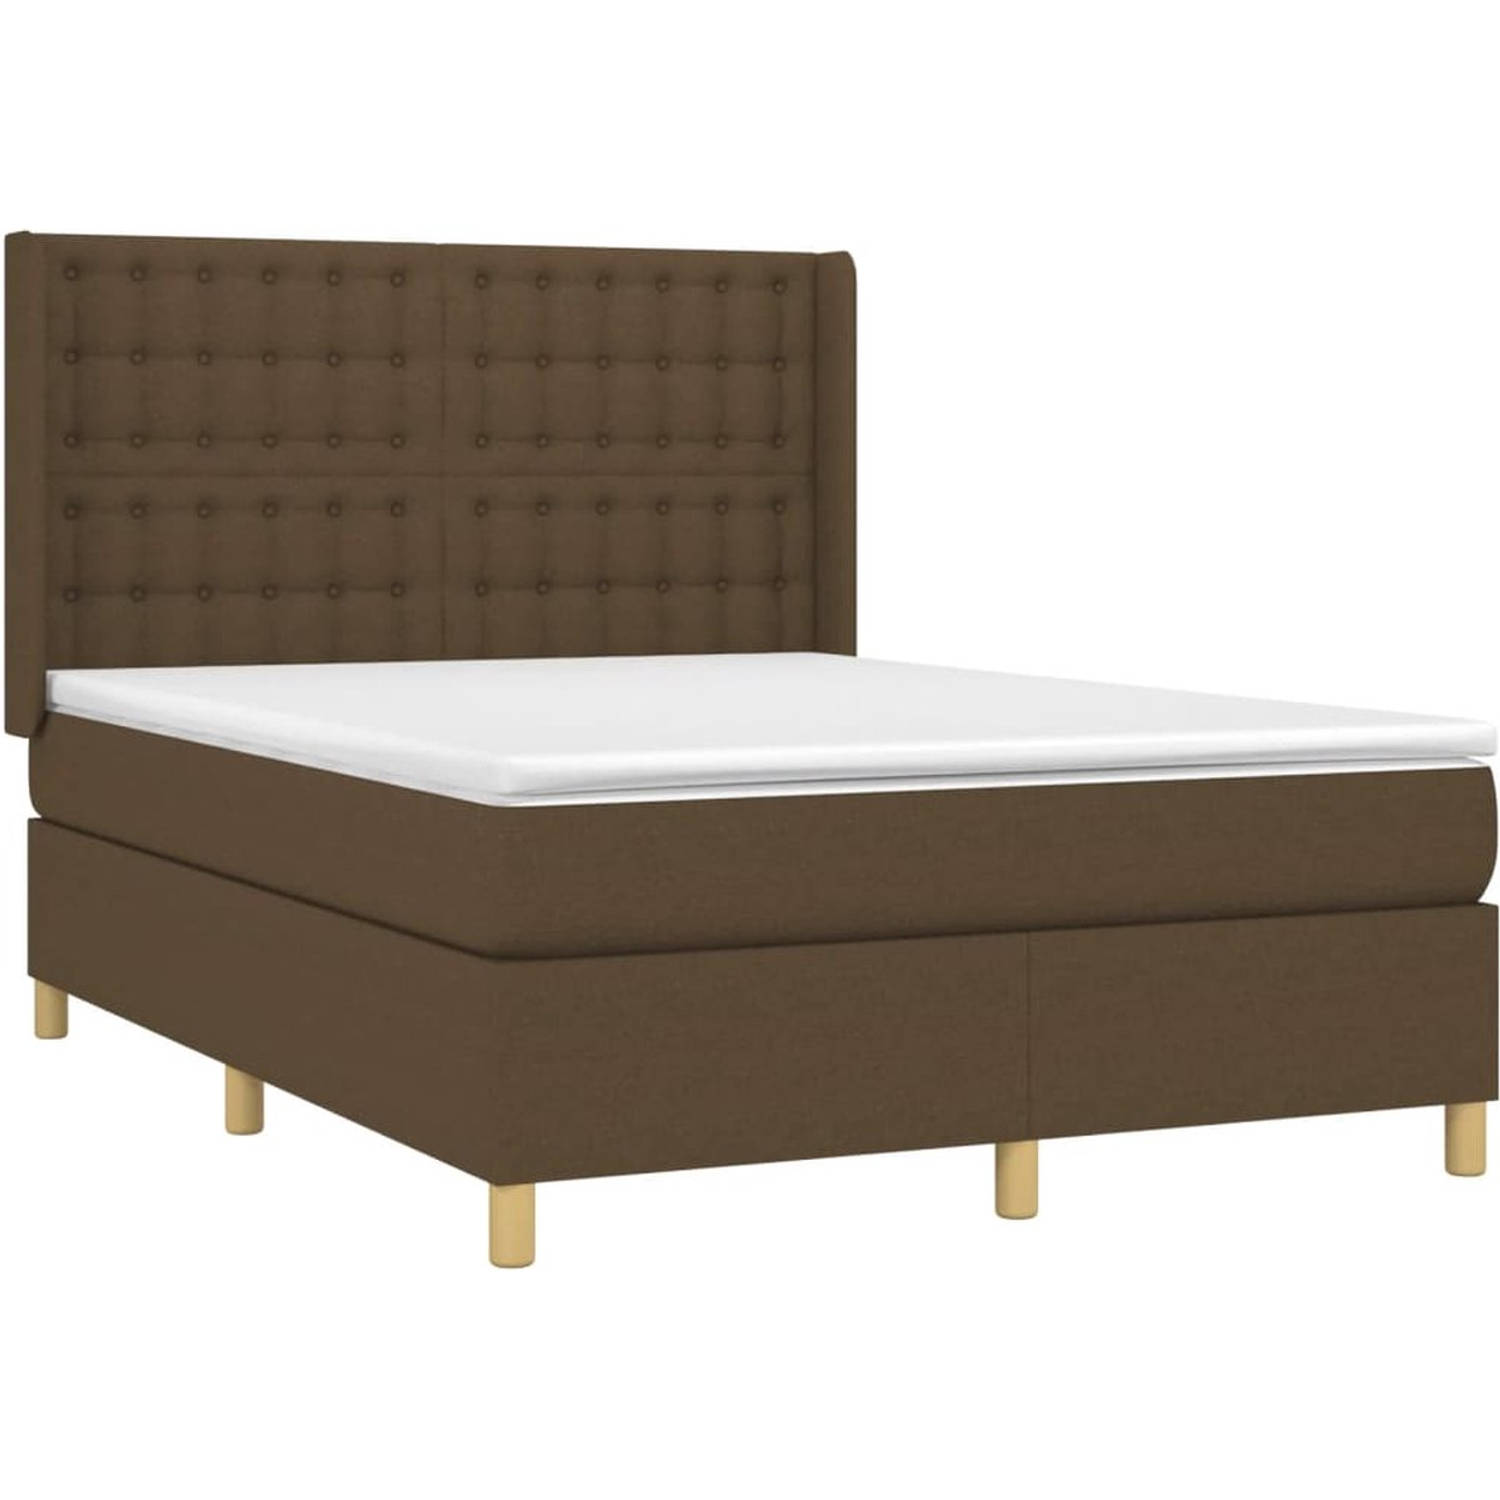 The Living Store Boxspring Bed - Donkerbruin - 203 x 147 x 118/128 cm - LED-verlichting